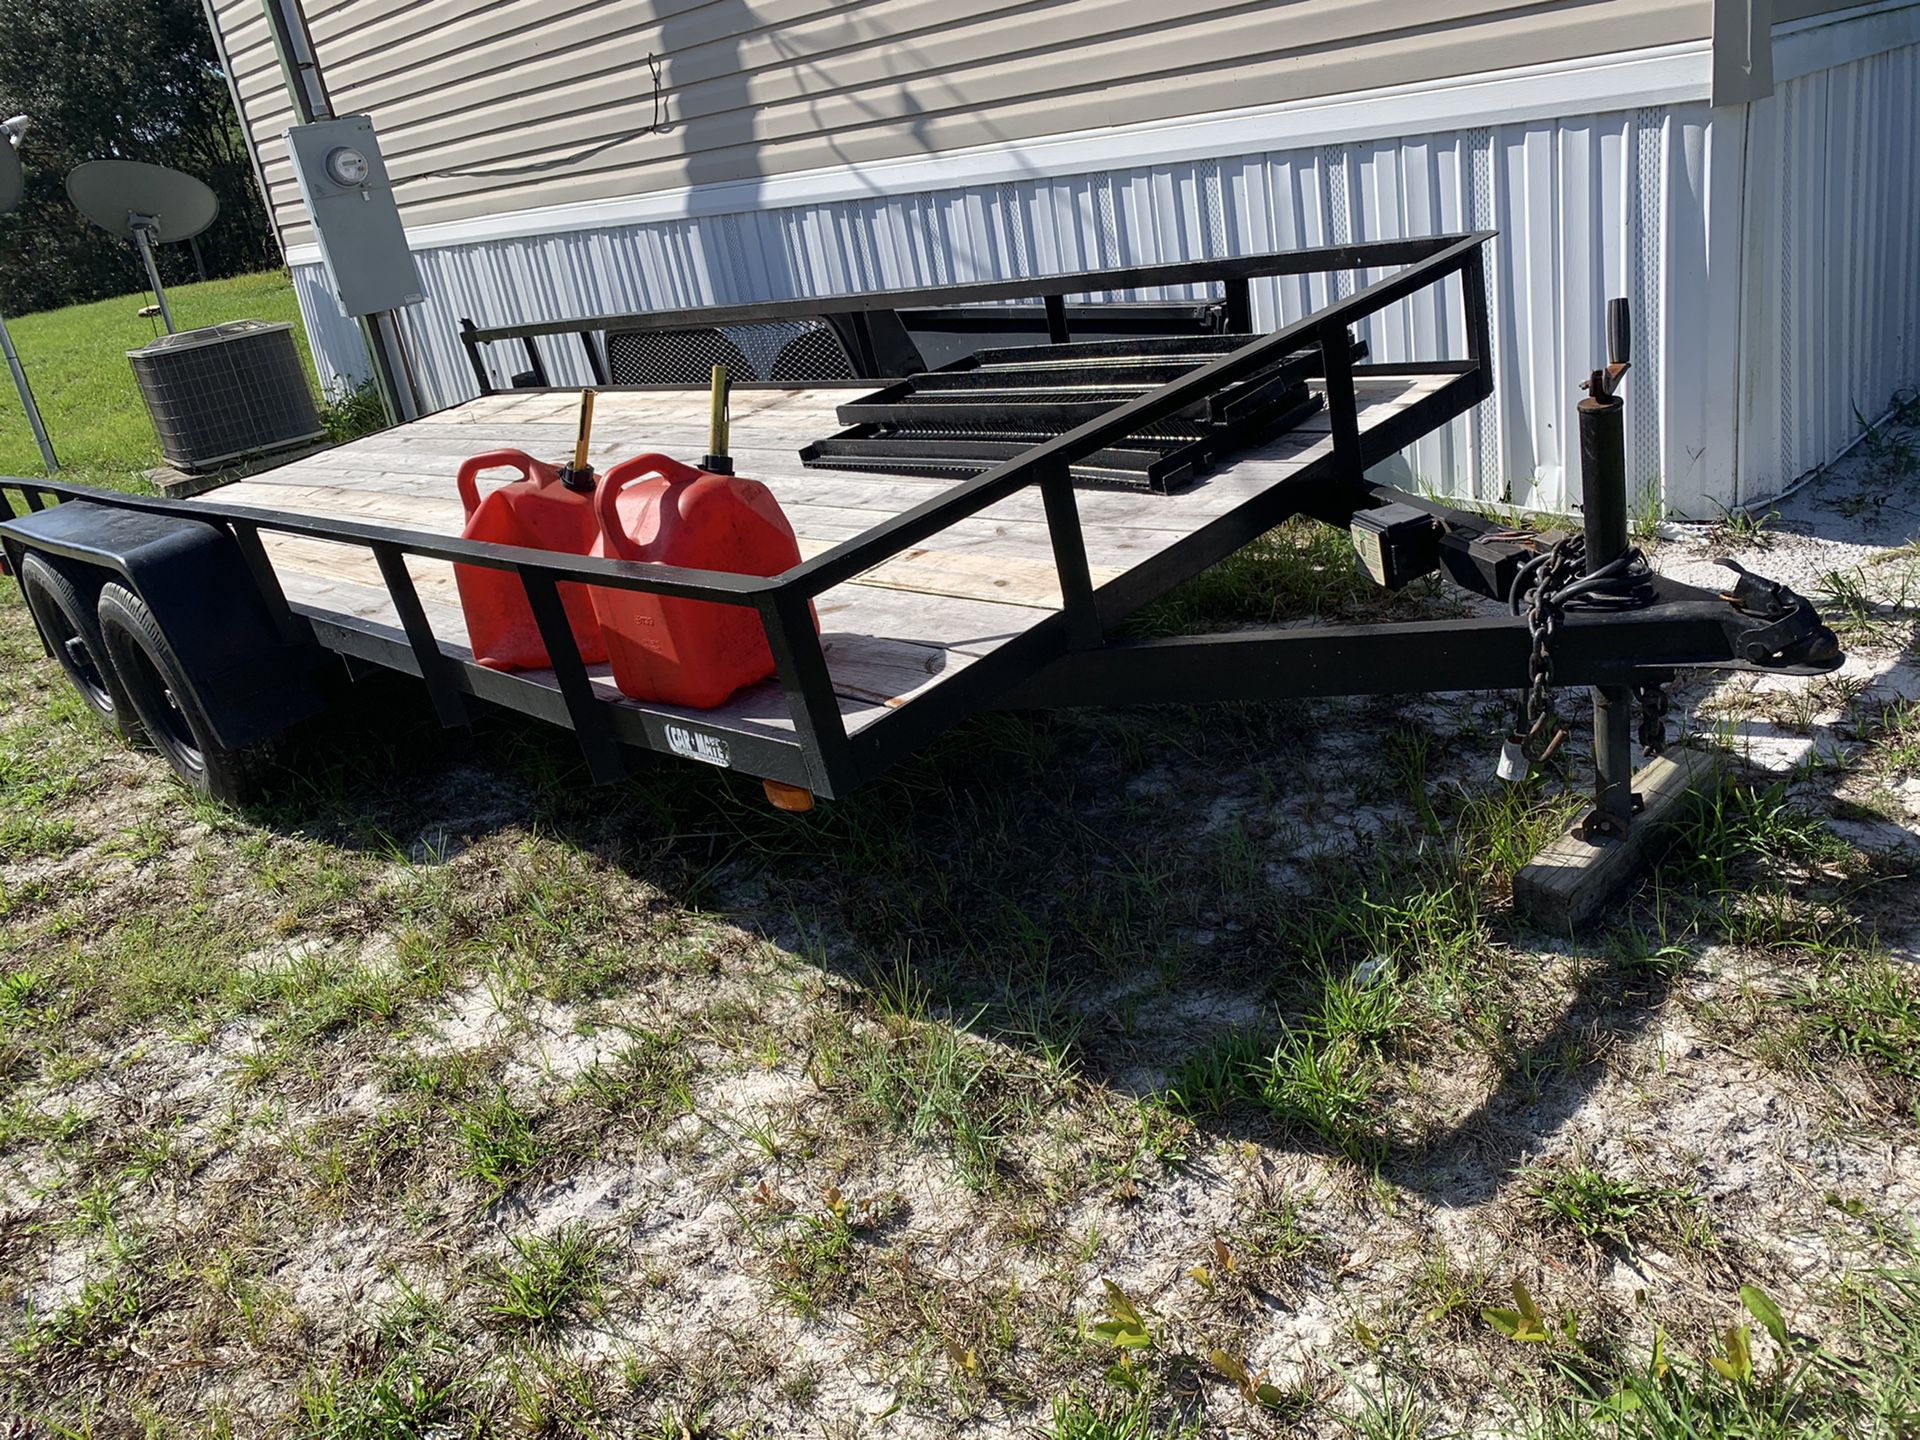 Trailer for sale $1600